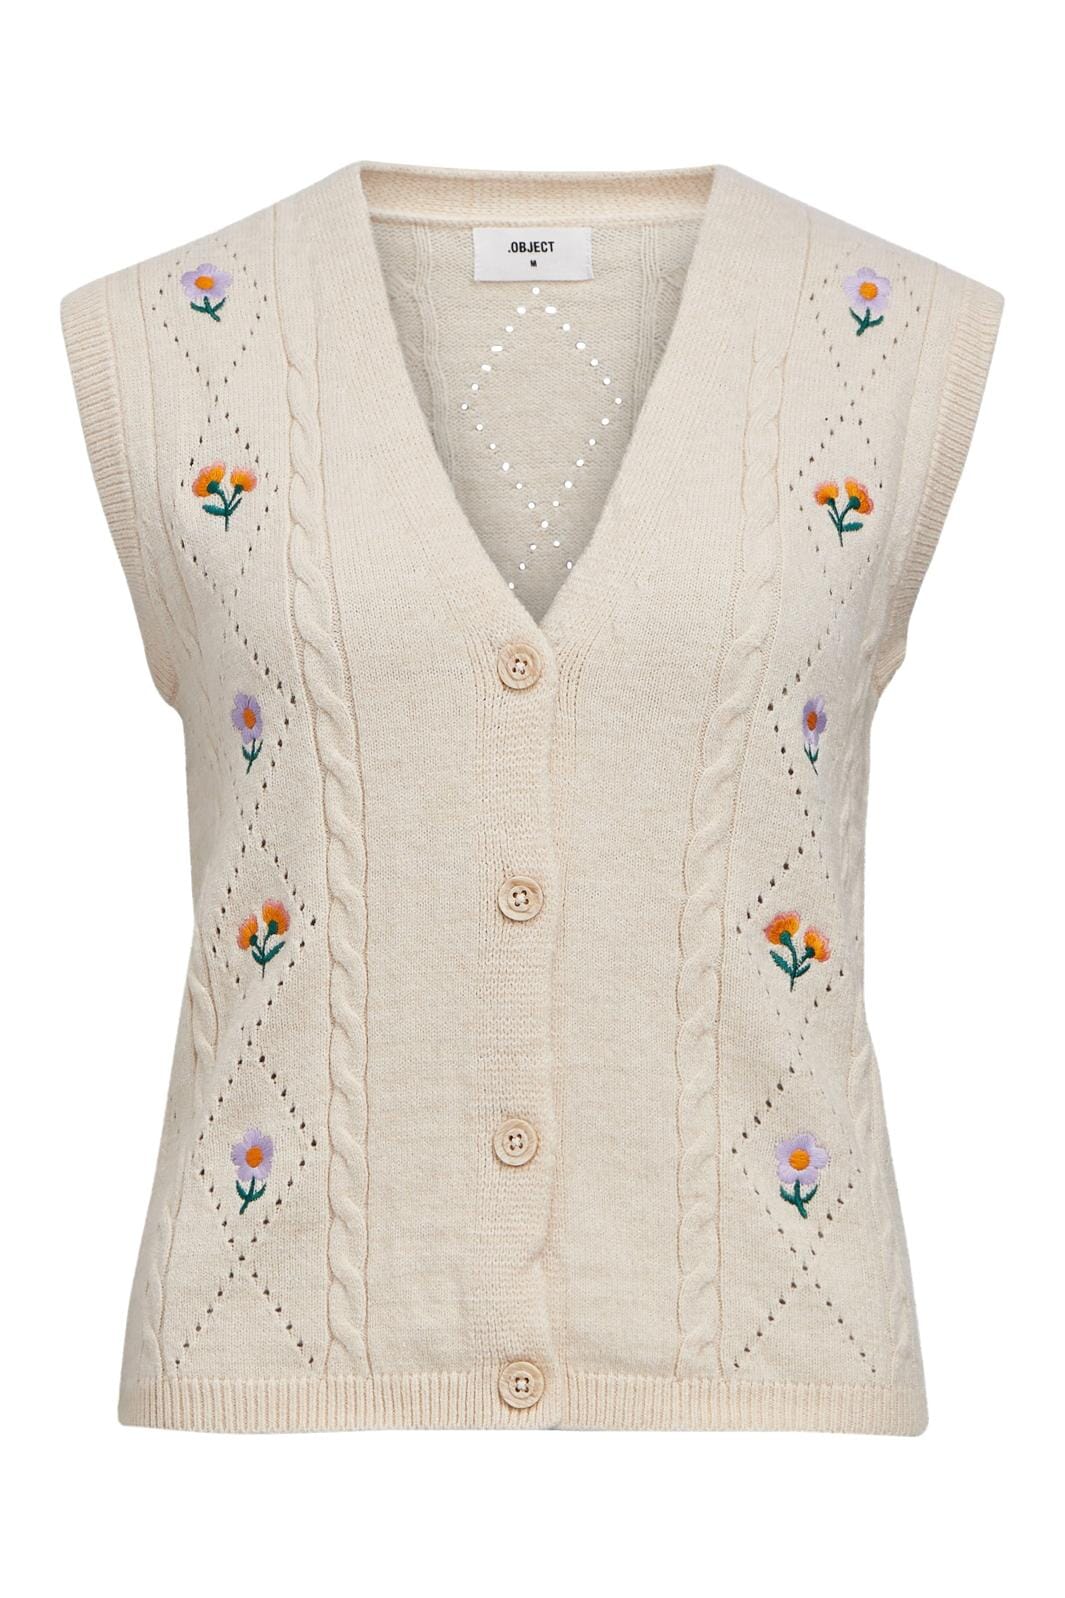 Object - Objthess Sl Knit Cable Waistcoat - 4621040 Sandshell Flower Embroidery